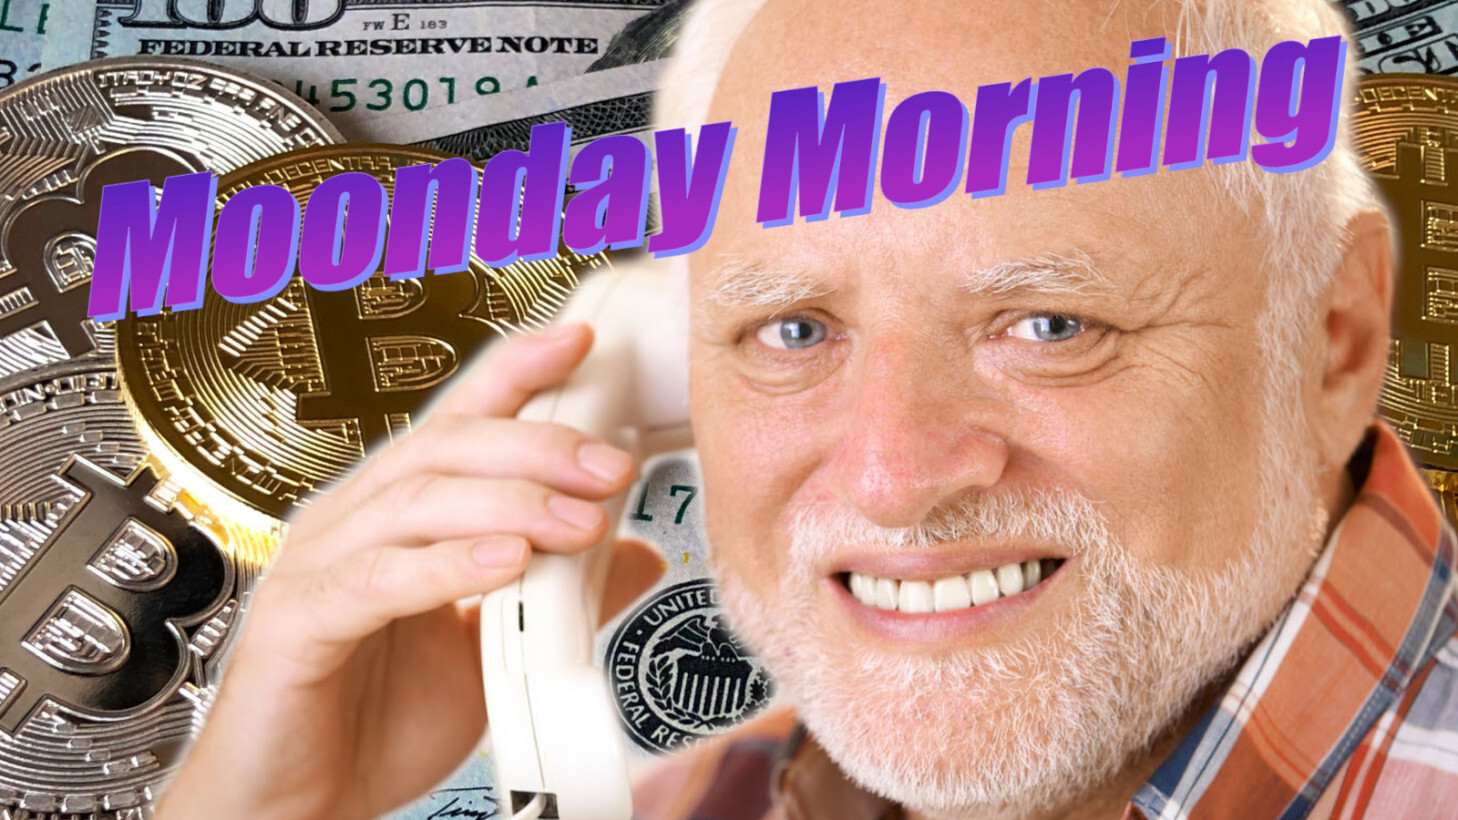 Moonday Mornings: $4B OneCoin cryptocurrency scam to be made into TV drama